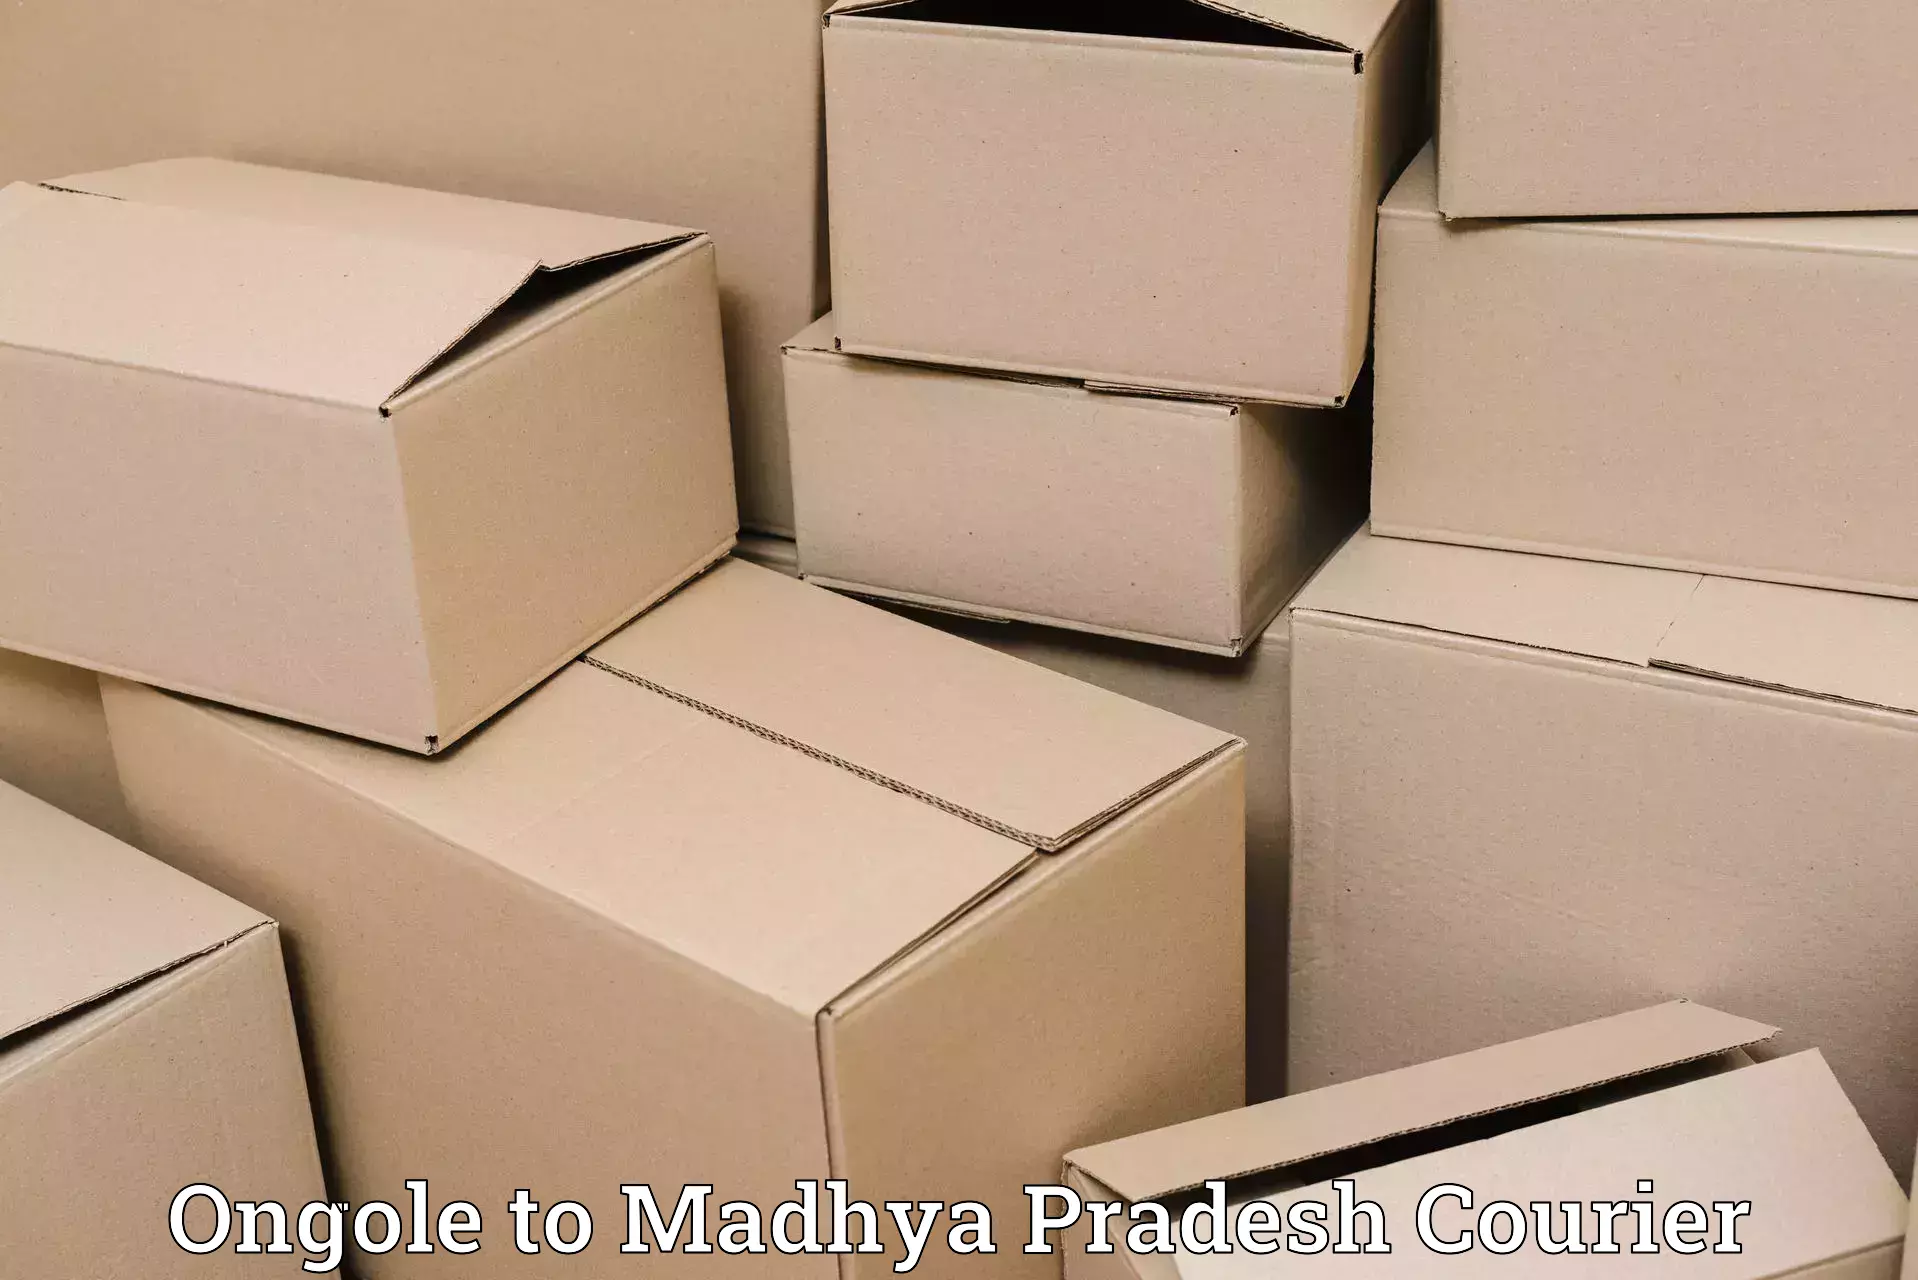 Modern courier technology Ongole to Pithampur